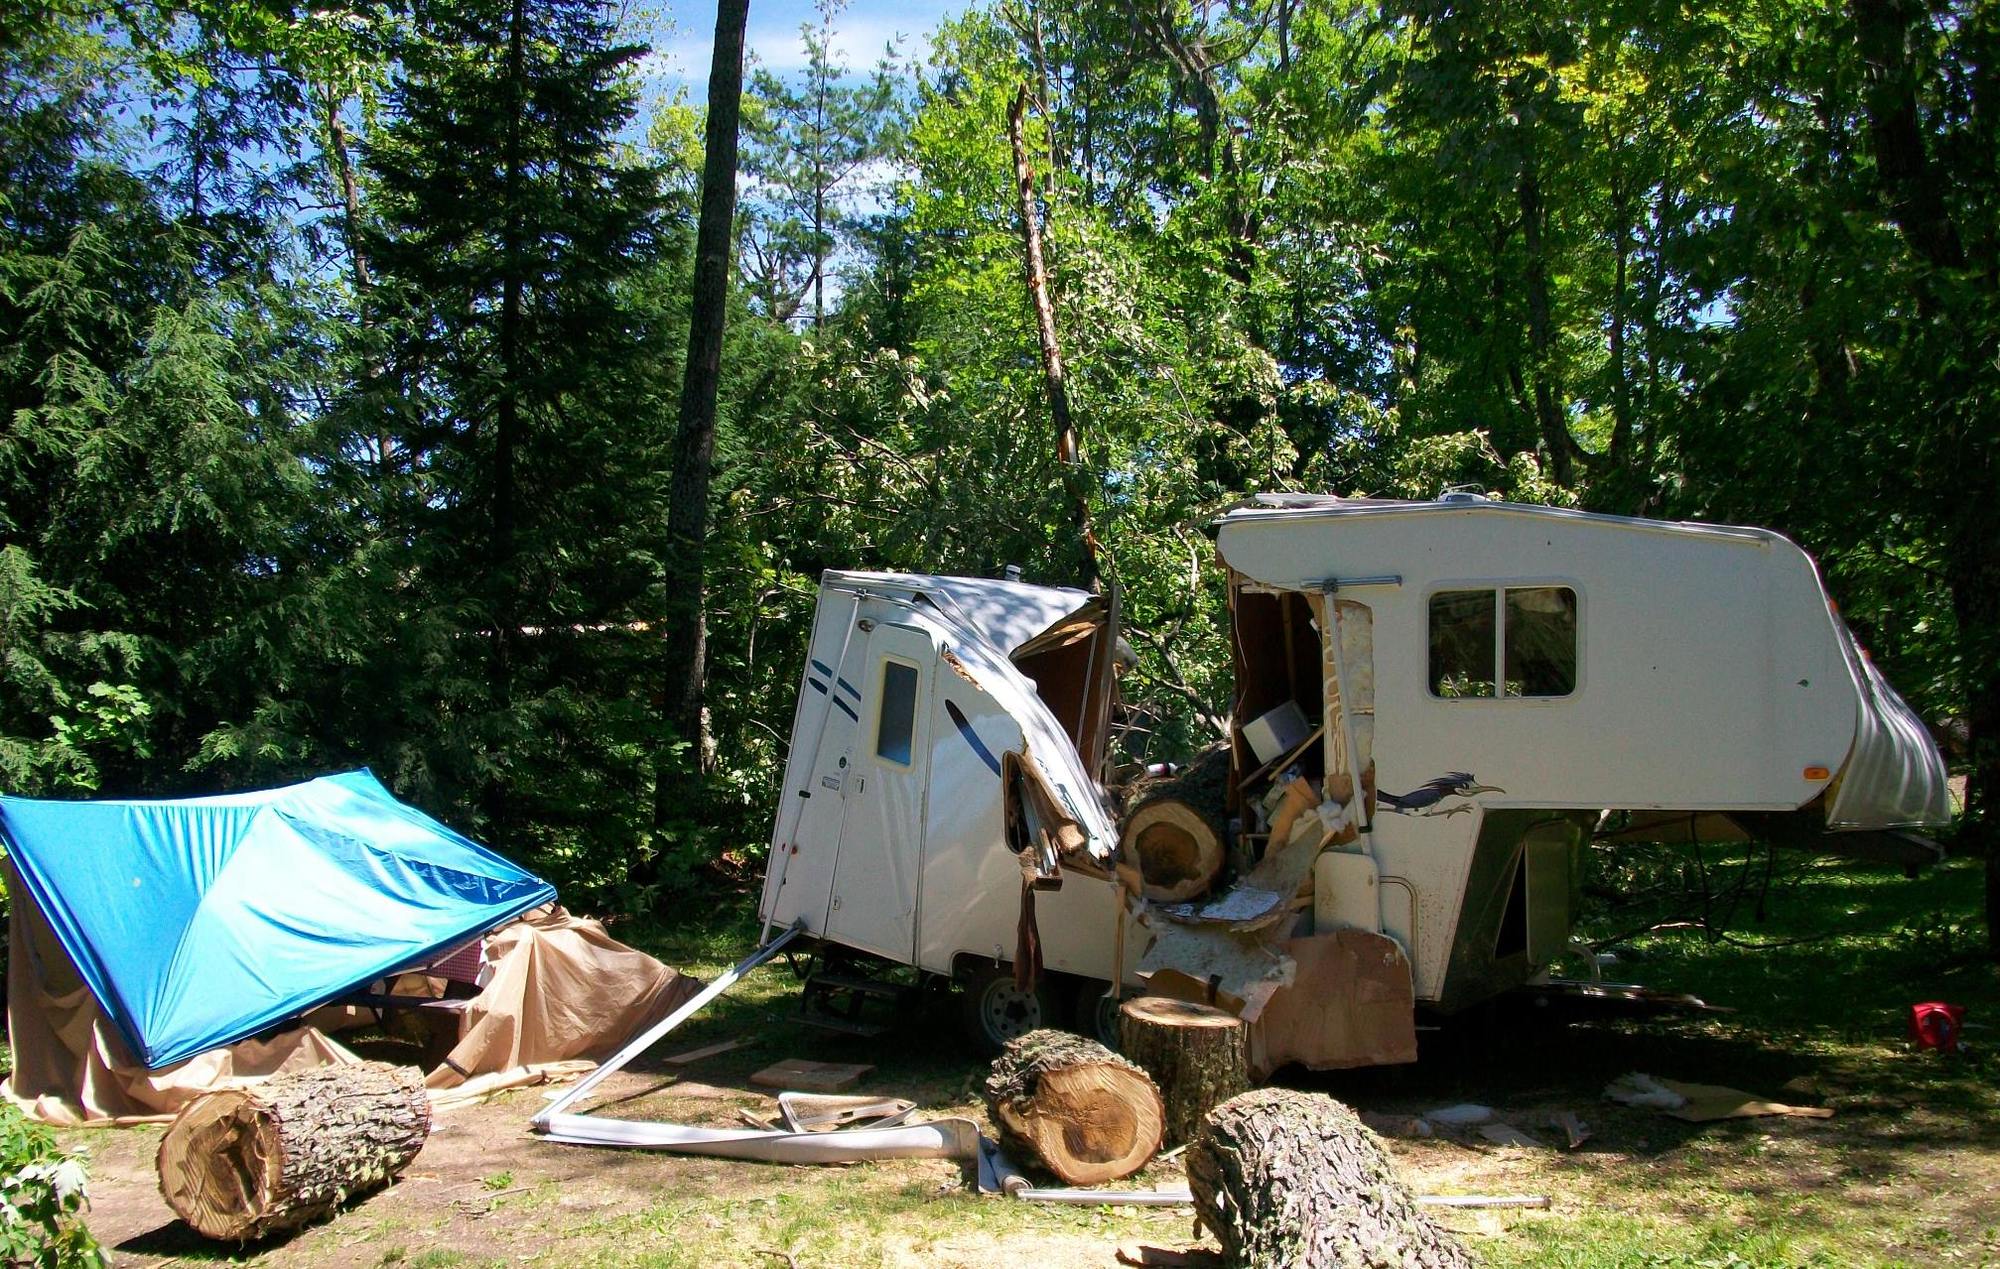 A camper damaged at the Emily Lake State Forest Campground in Houghton County.